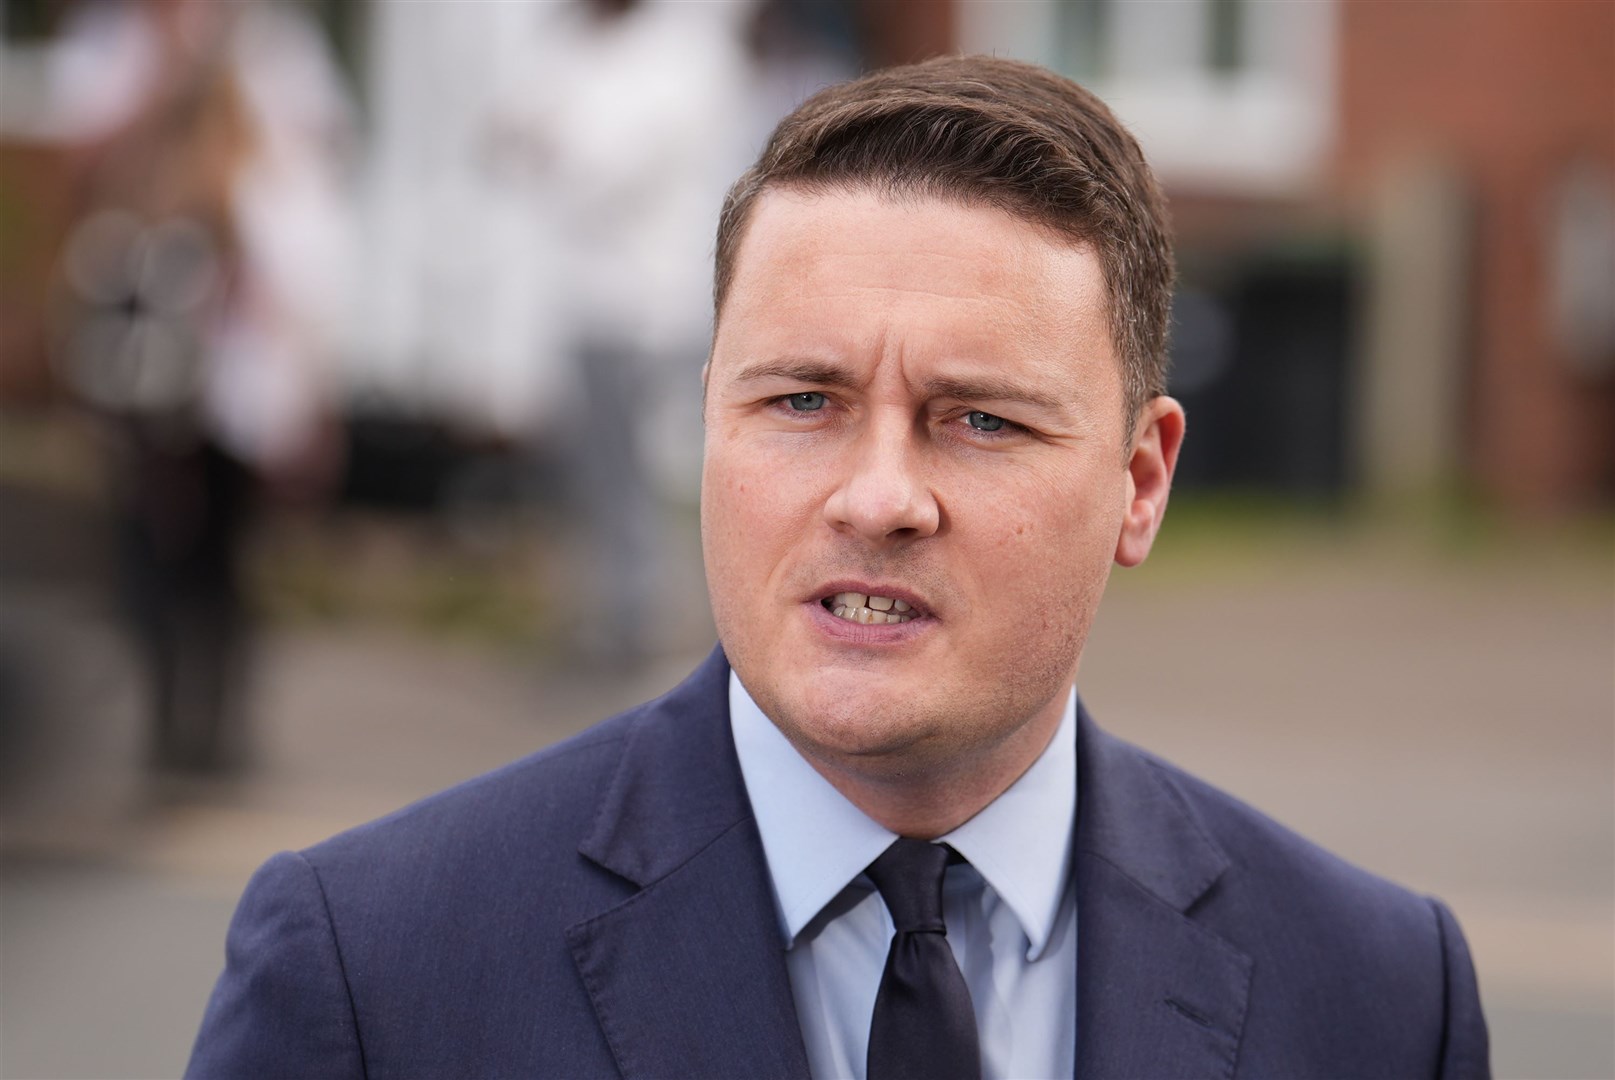 Shadow health secretary and the MP for Ilford North, Wes Streeting, speaking in Hainault (Jordan Pettitt/PA)